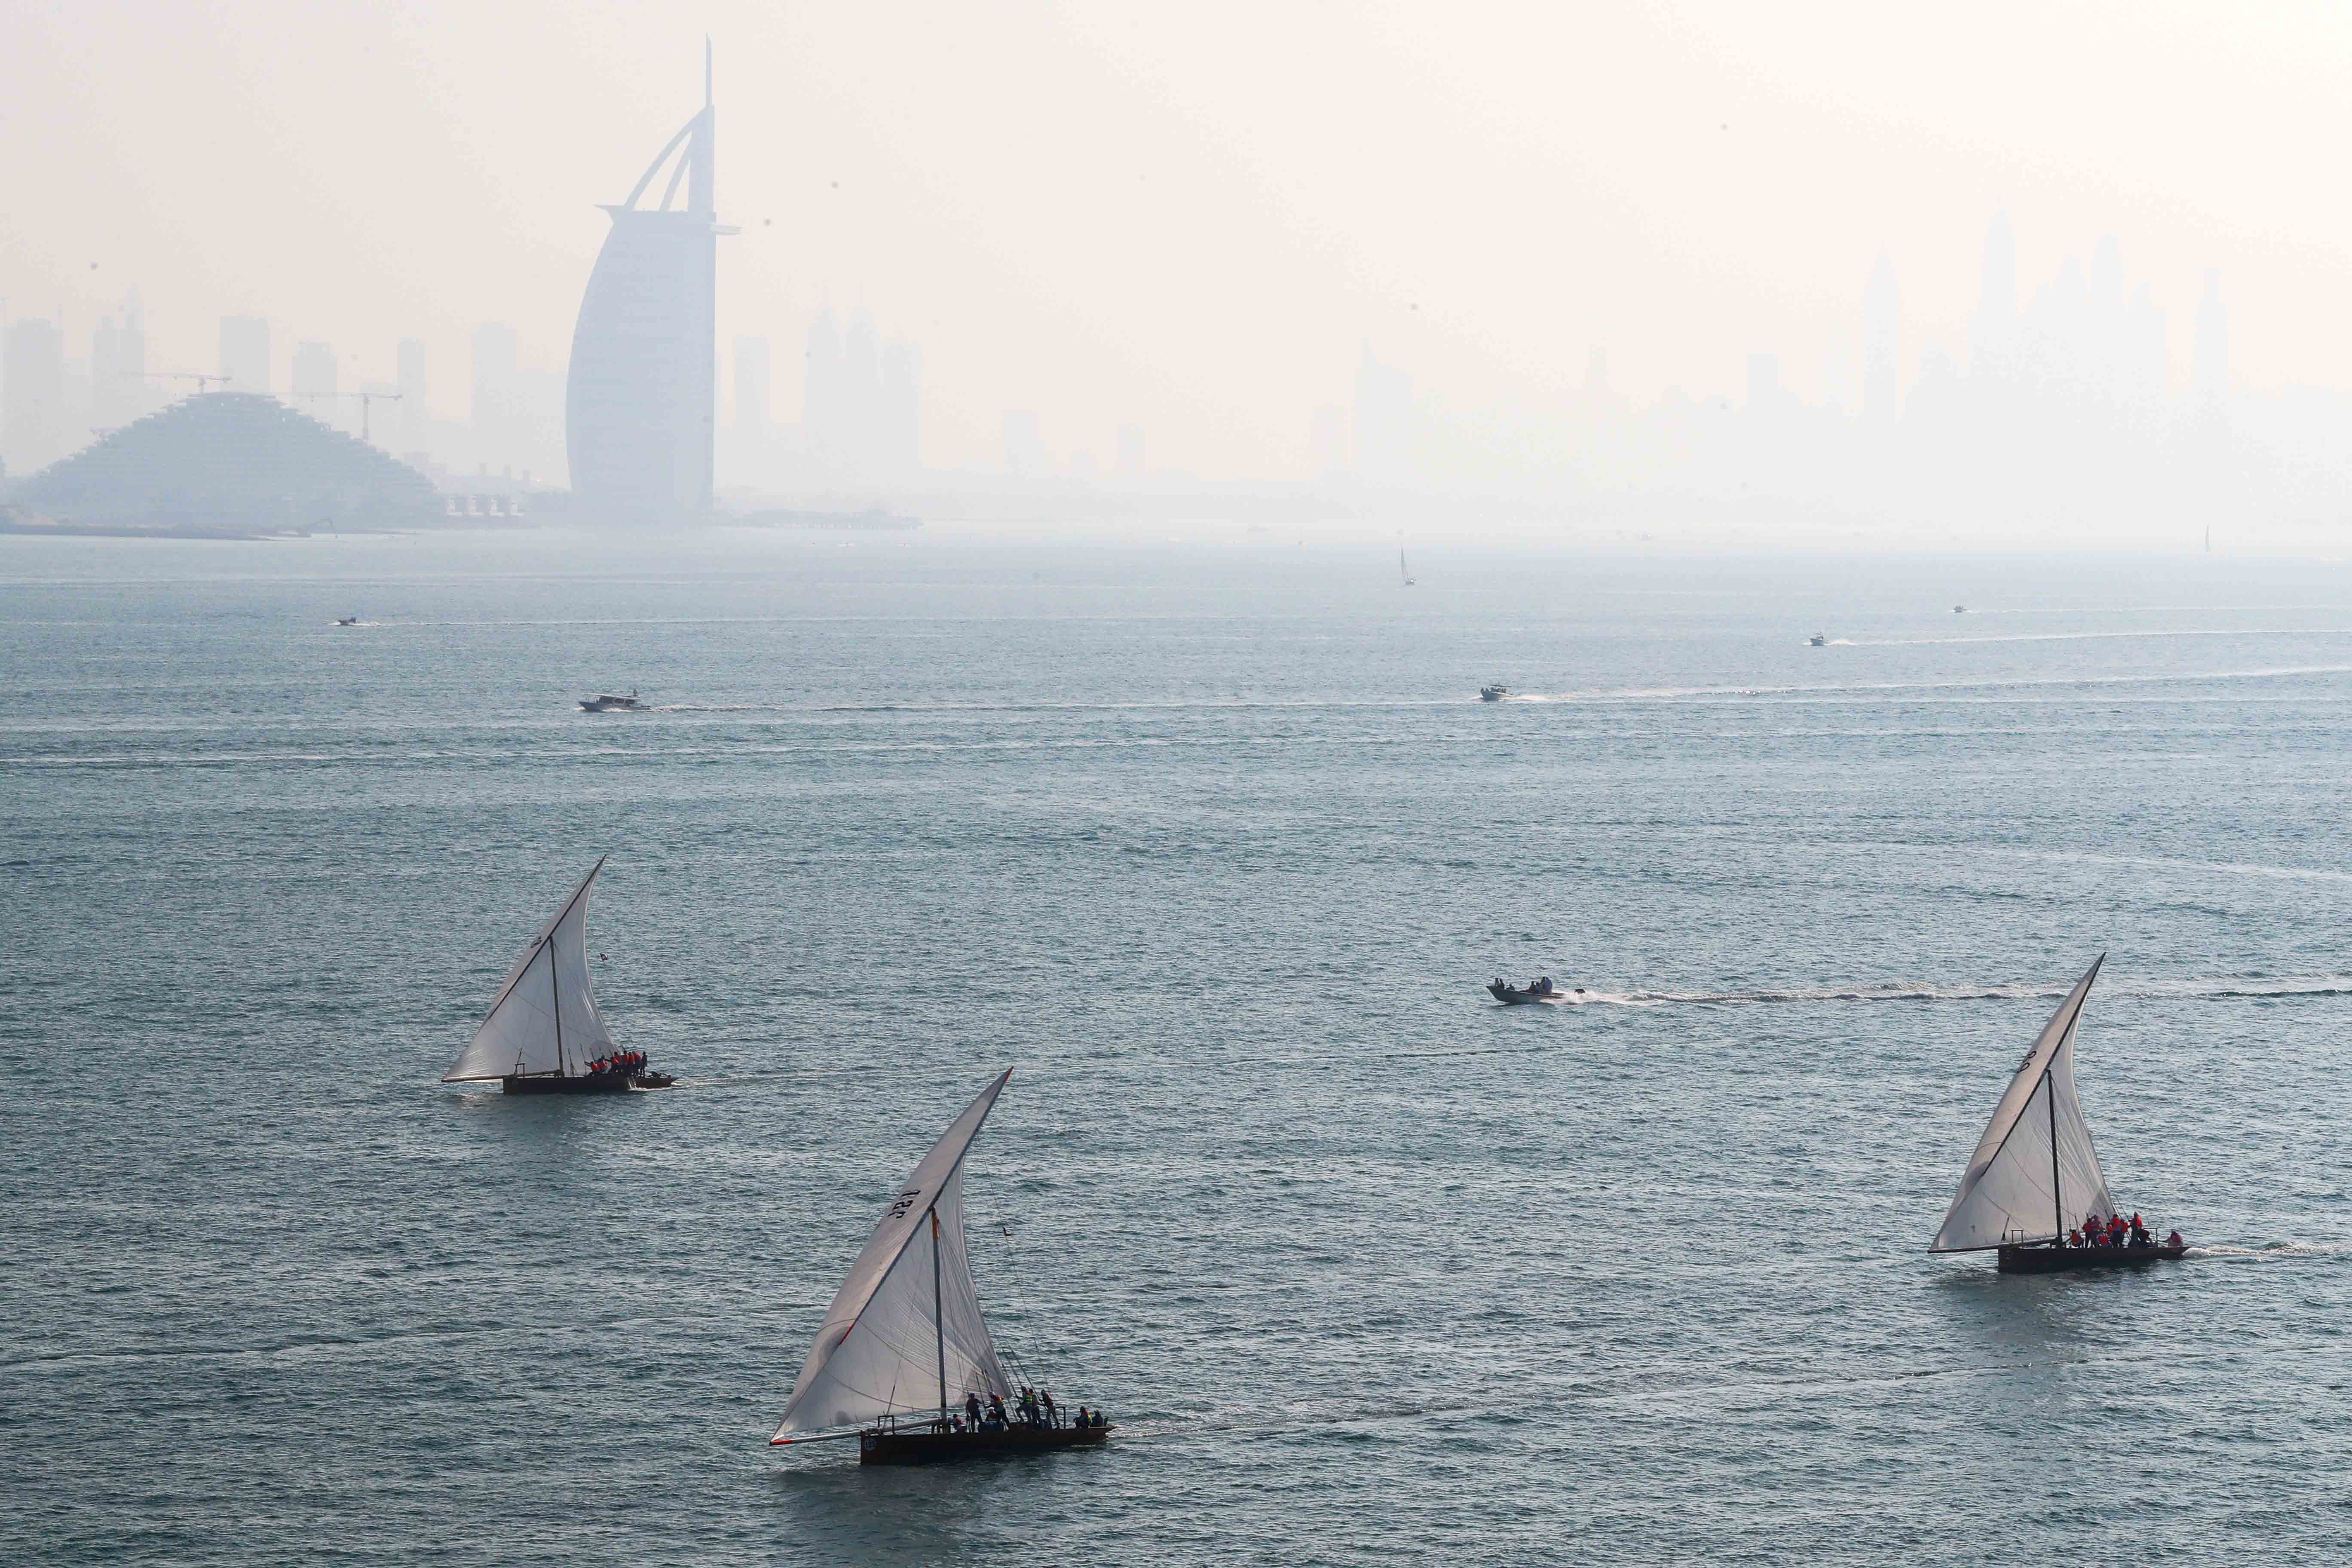 A Significant Turnout of Participants is Expected for Tomorrow's 43ft Dubai Traditional Dhow Sailing Race